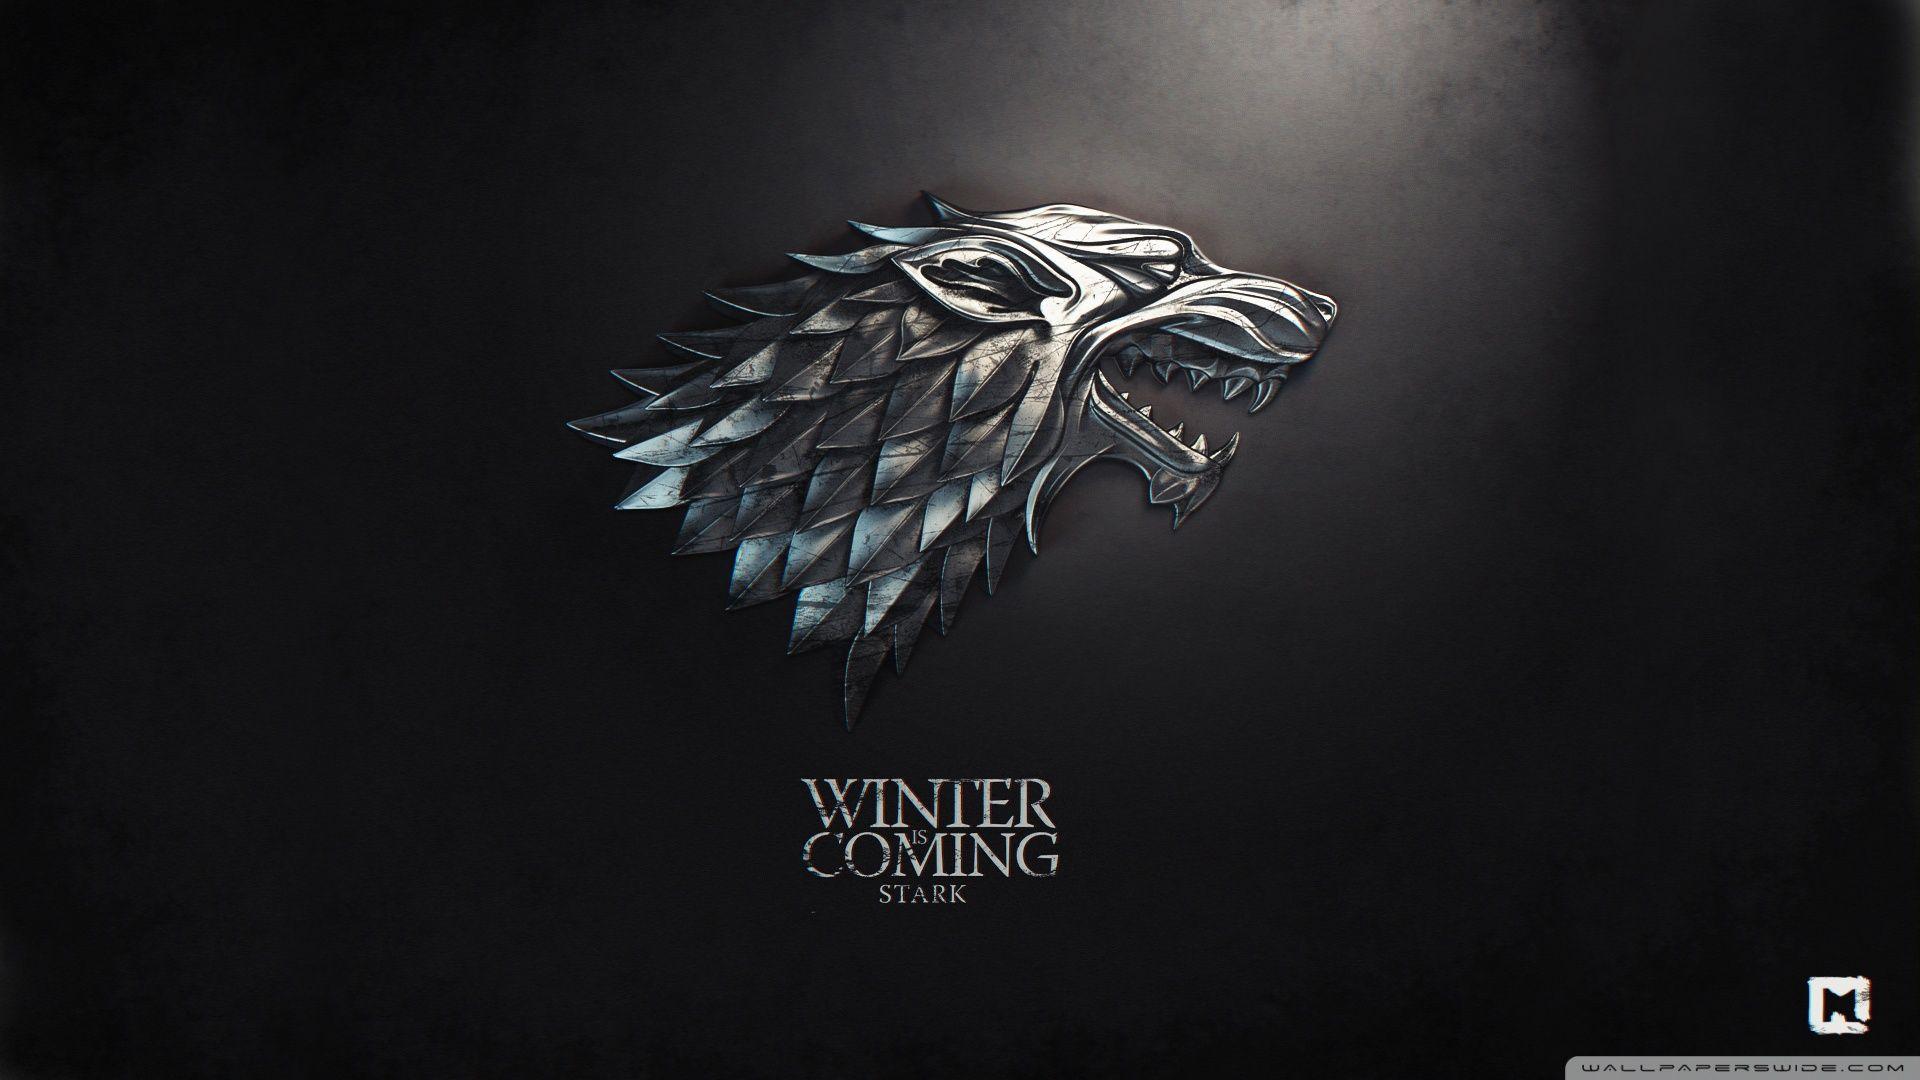 WallpapersWide ❤ Game of Thrones 2K Desk 4K Wallpapers for K